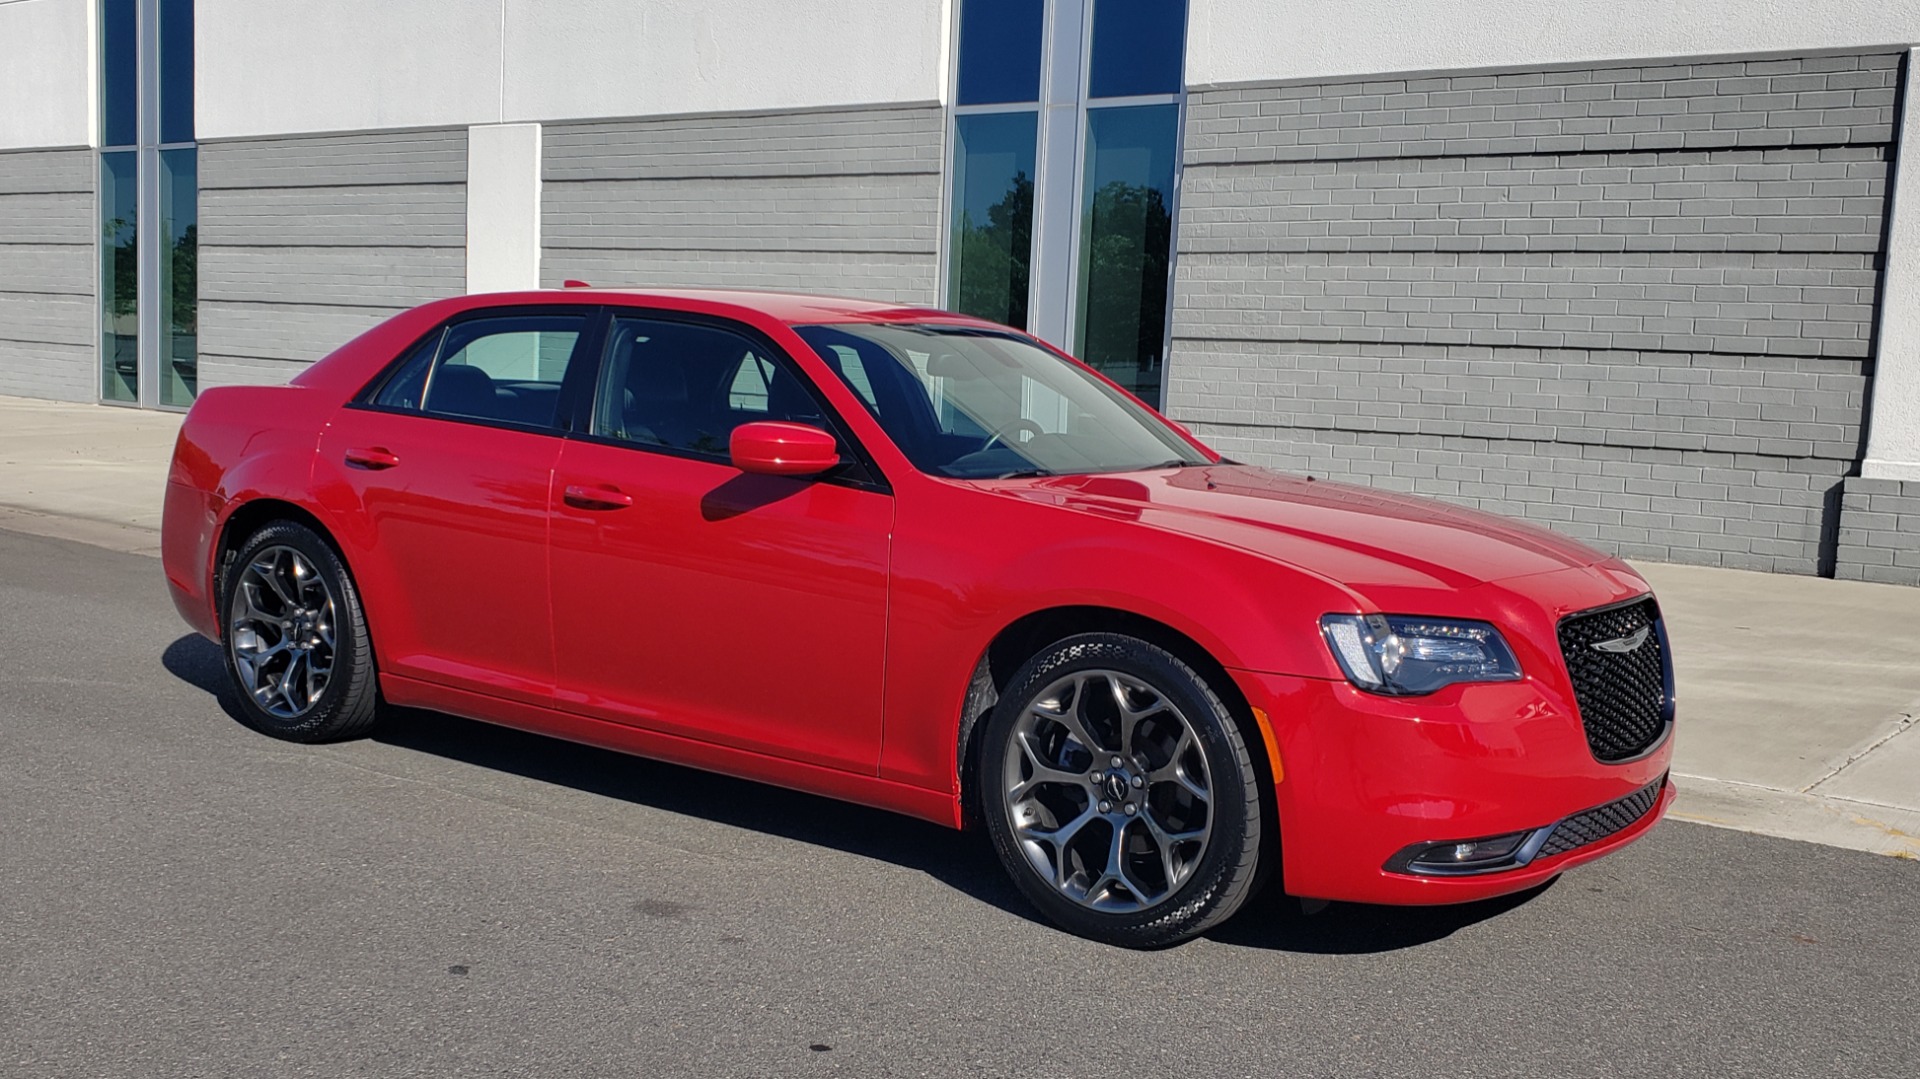 Used 2015 Chrysler 300 S / 3.6L V6 / 8-SPD AUTO / NAV / BEATS AUDIO / HTS STS / REARVIE for sale Sold at Formula Imports in Charlotte NC 28227 12